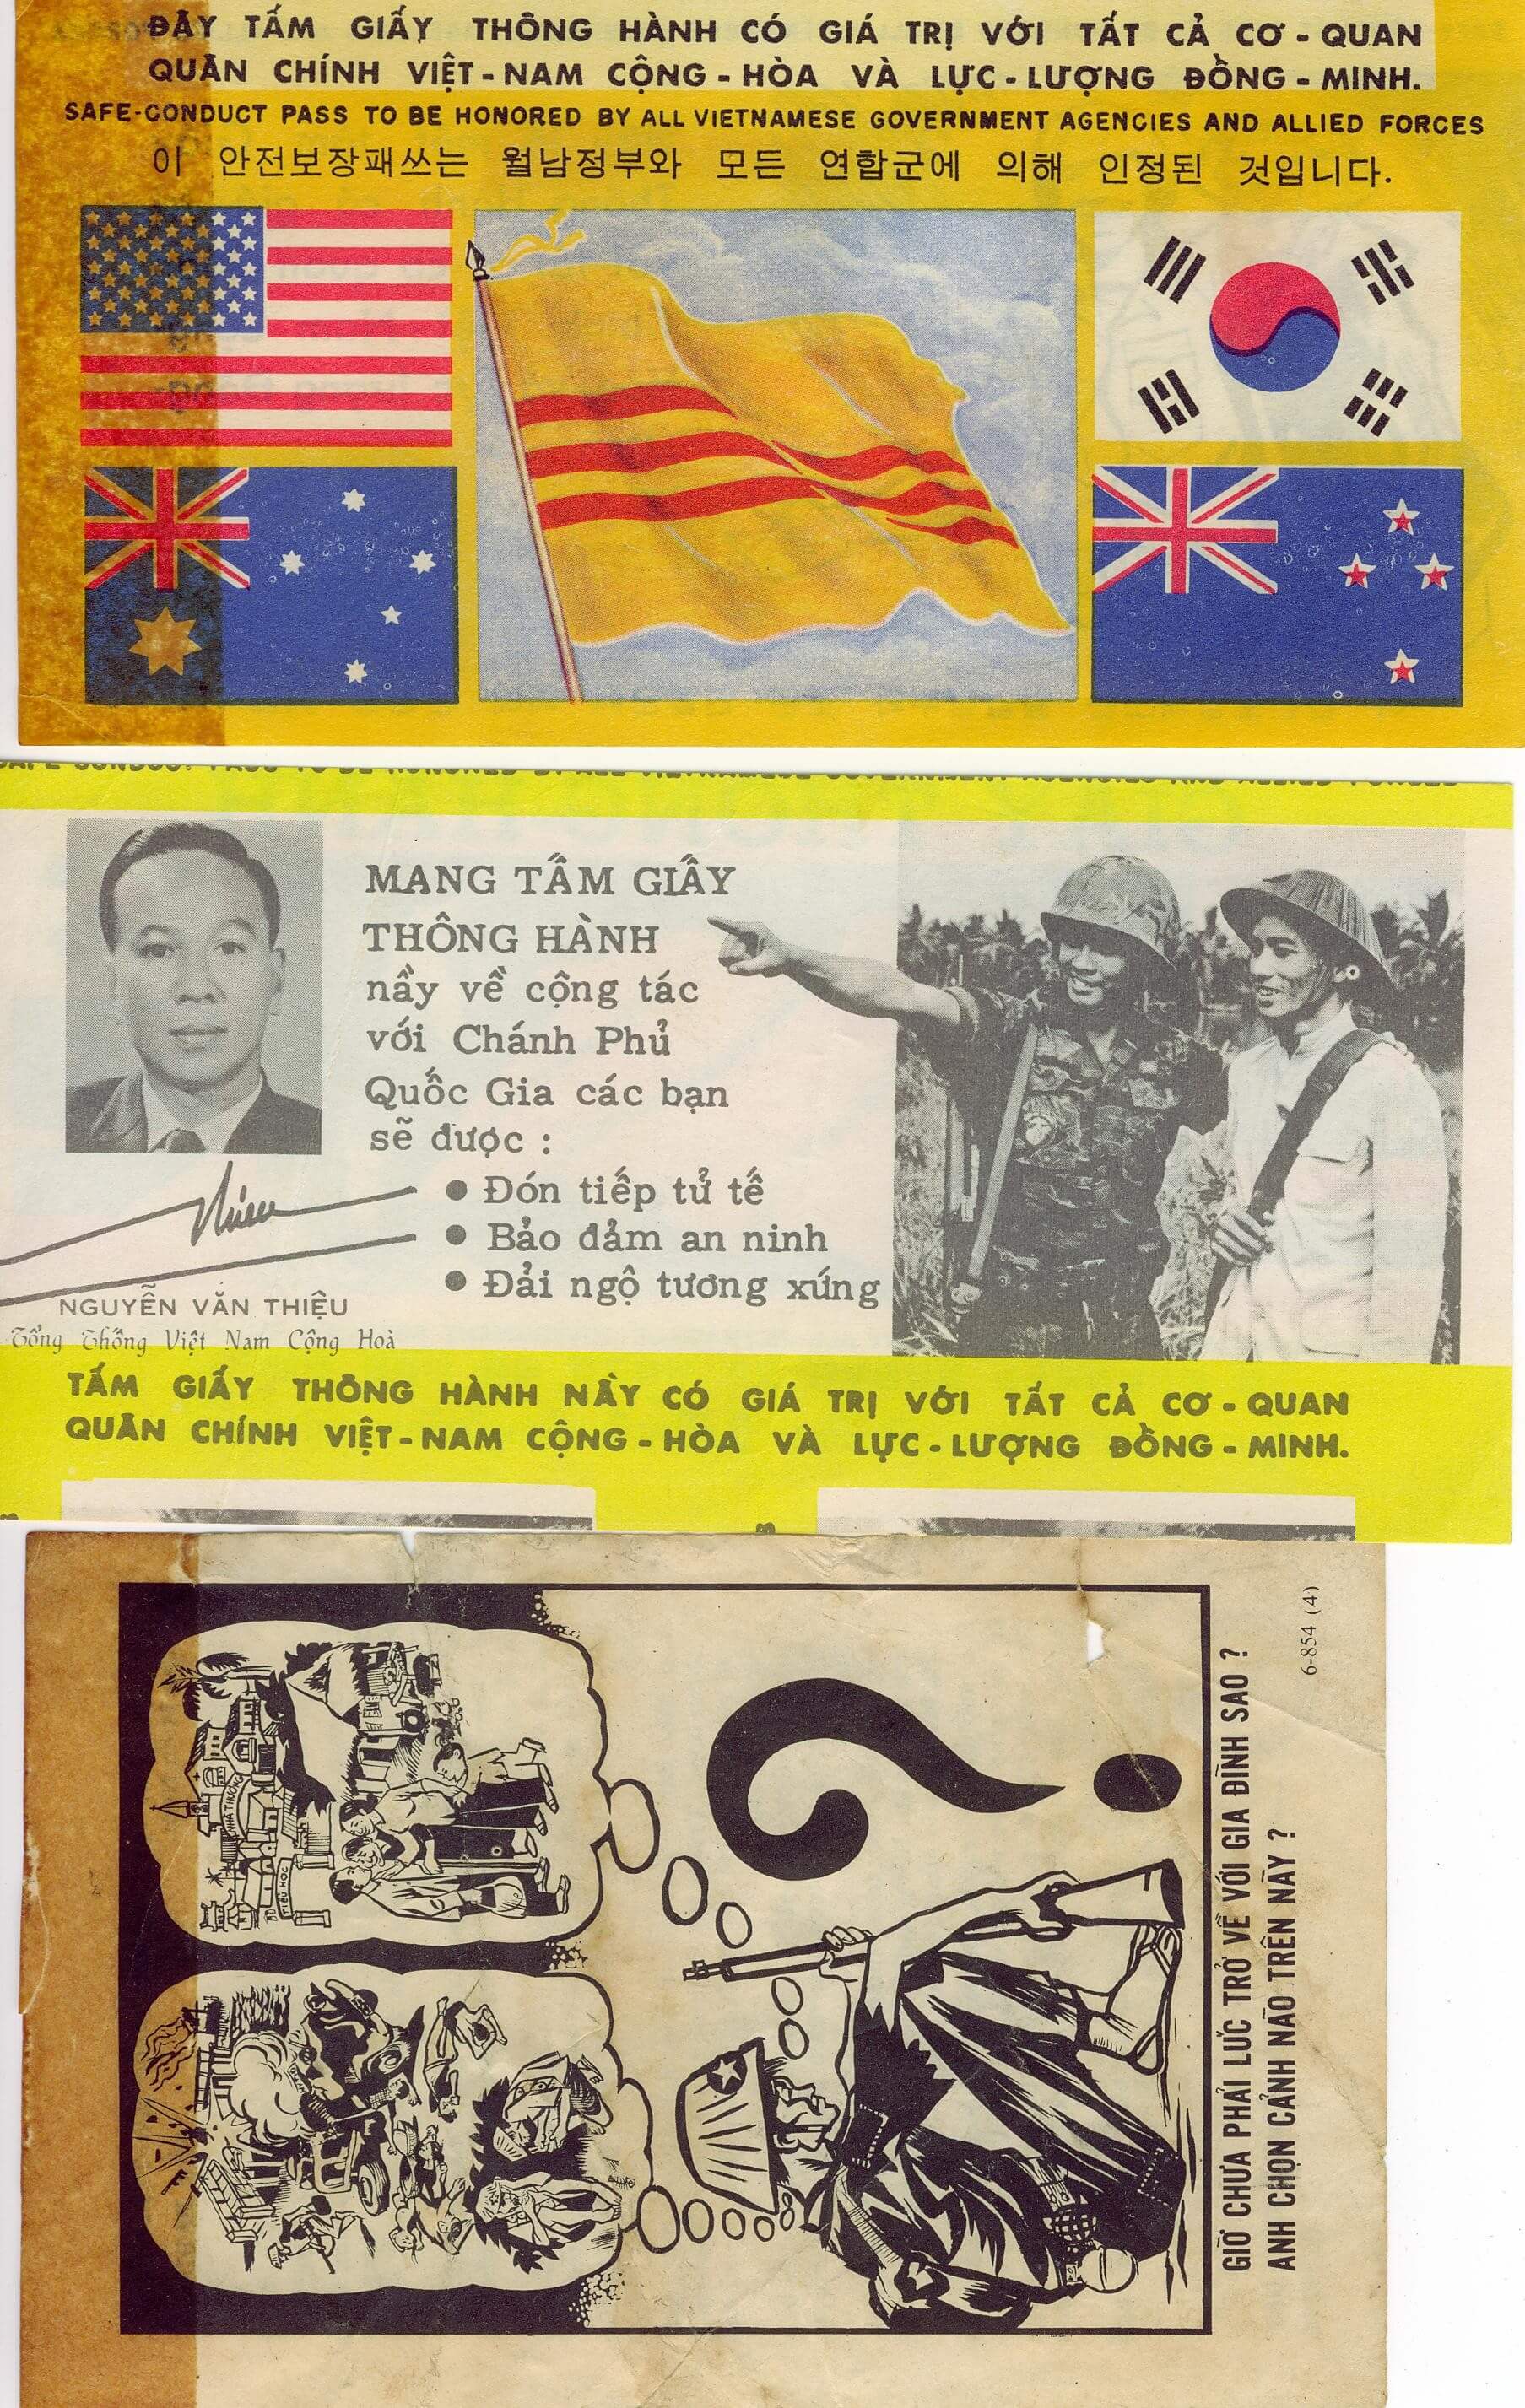 This picture shows ‘safe passes’ that were distributed about the country, mainly tossed from helicopters.  The intention was for Viet Cong to present one to our side – surrender if you will – and come over to the South Vietnam side.  It was meant to assure the holder of safe passage.  Not sure that always worked.